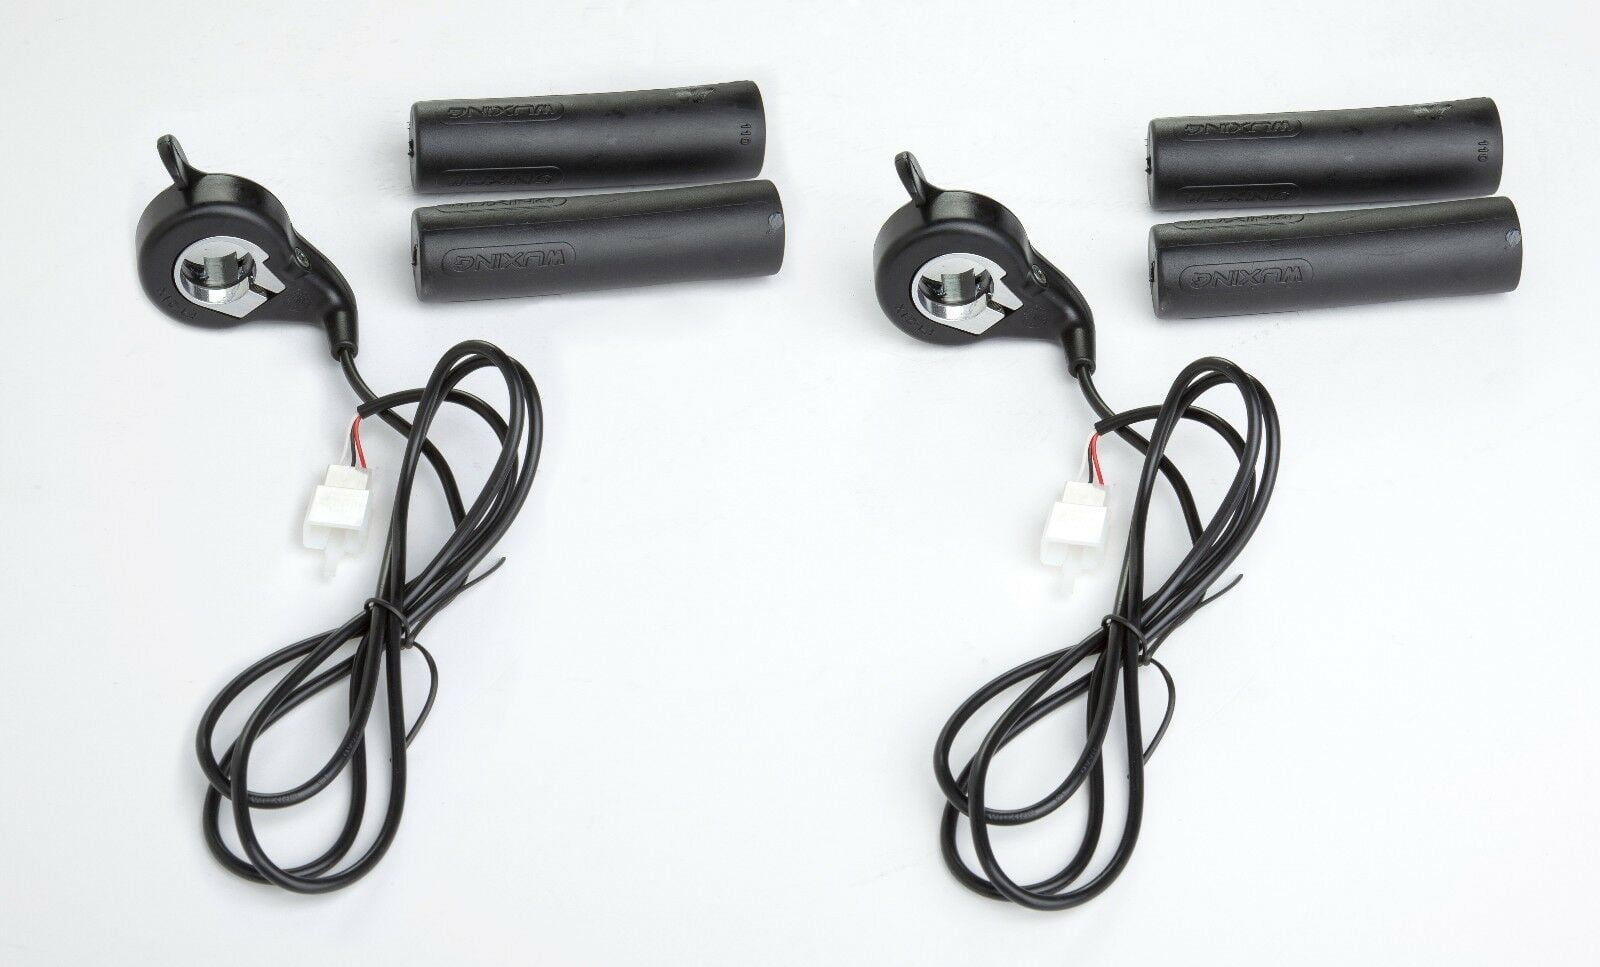 24/36/48v Twist Throttle Thumb Control Assembly For E-bike Electric Bike Scooter 